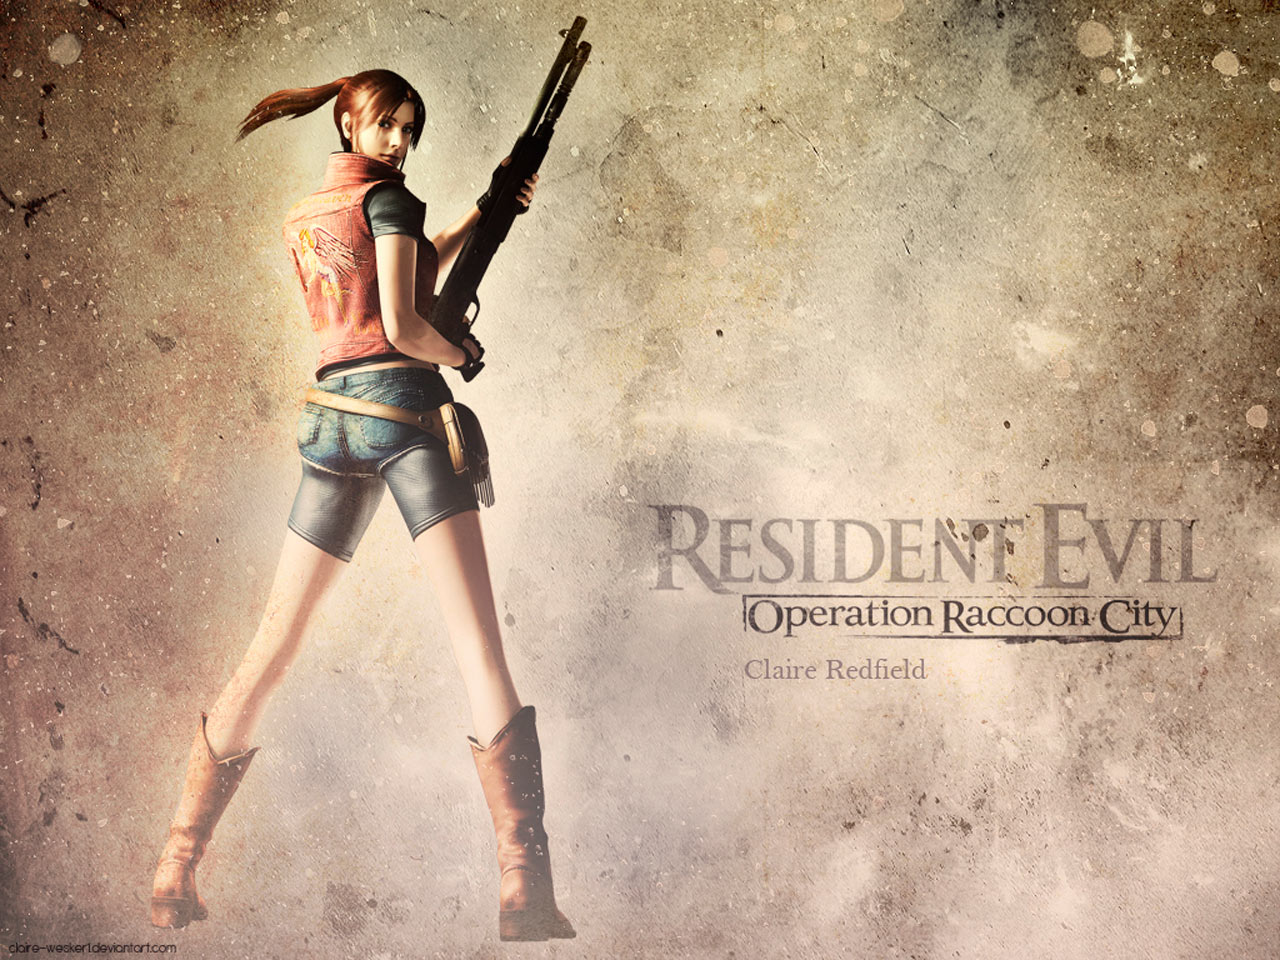 Claire redfield personality